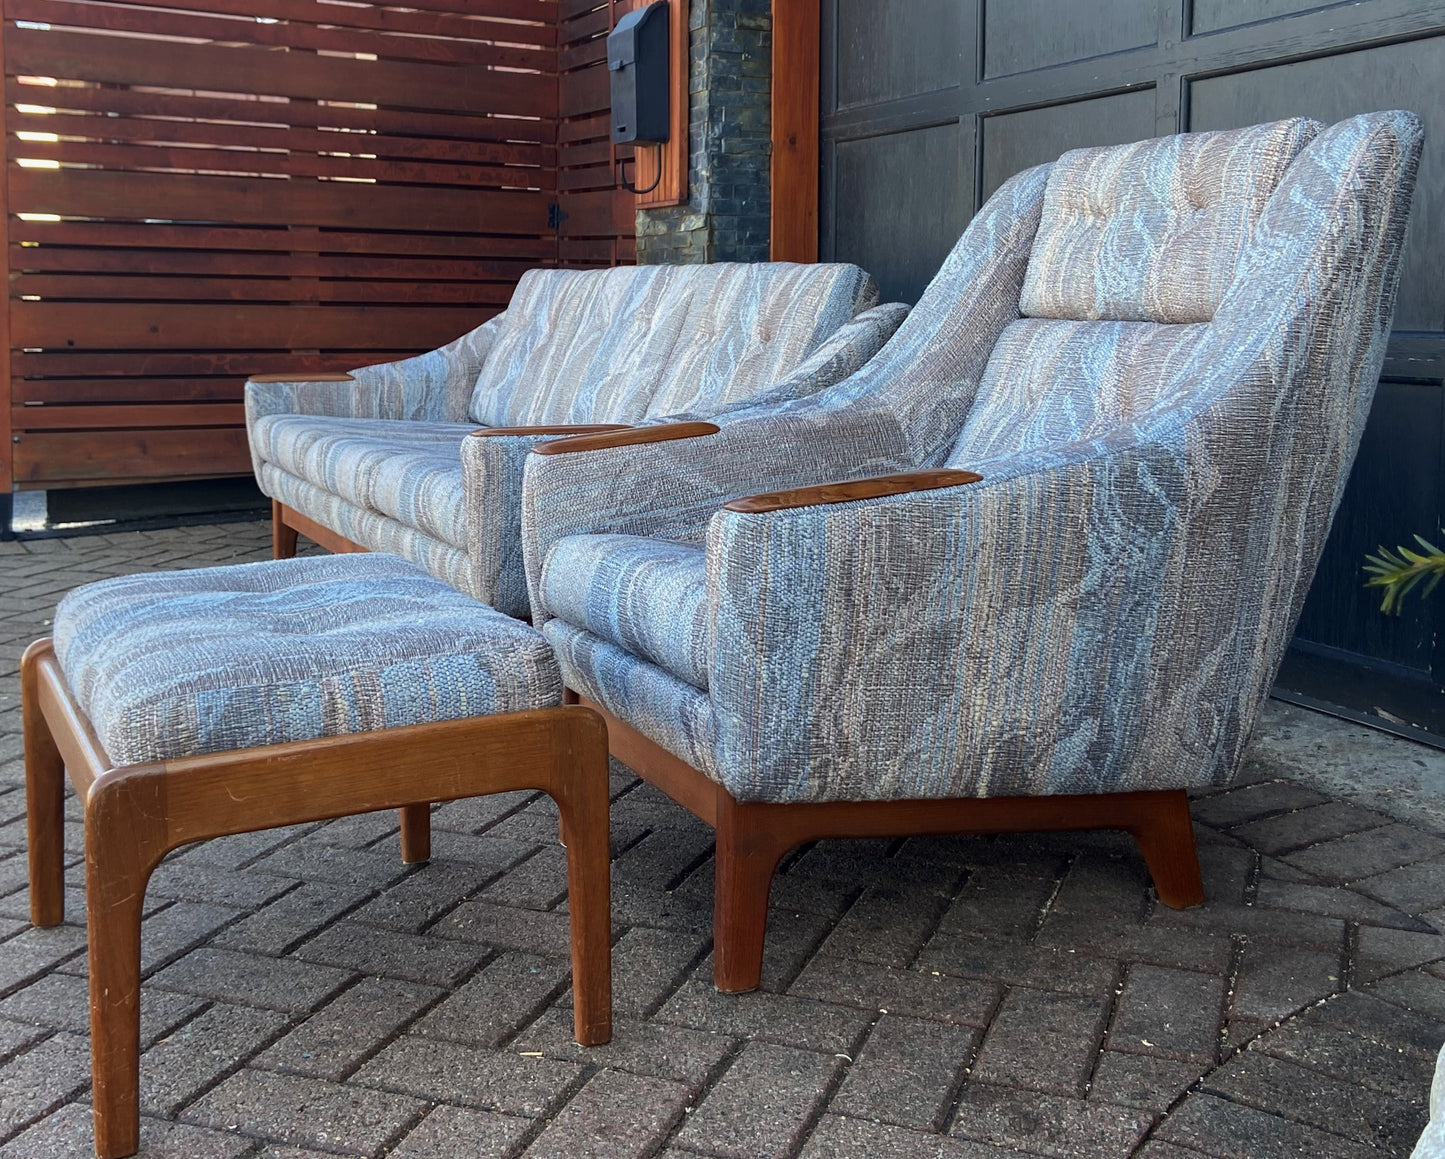 REFINISHED Danish styled MCM Teak Sofa, Lounge Chair and Ottoman